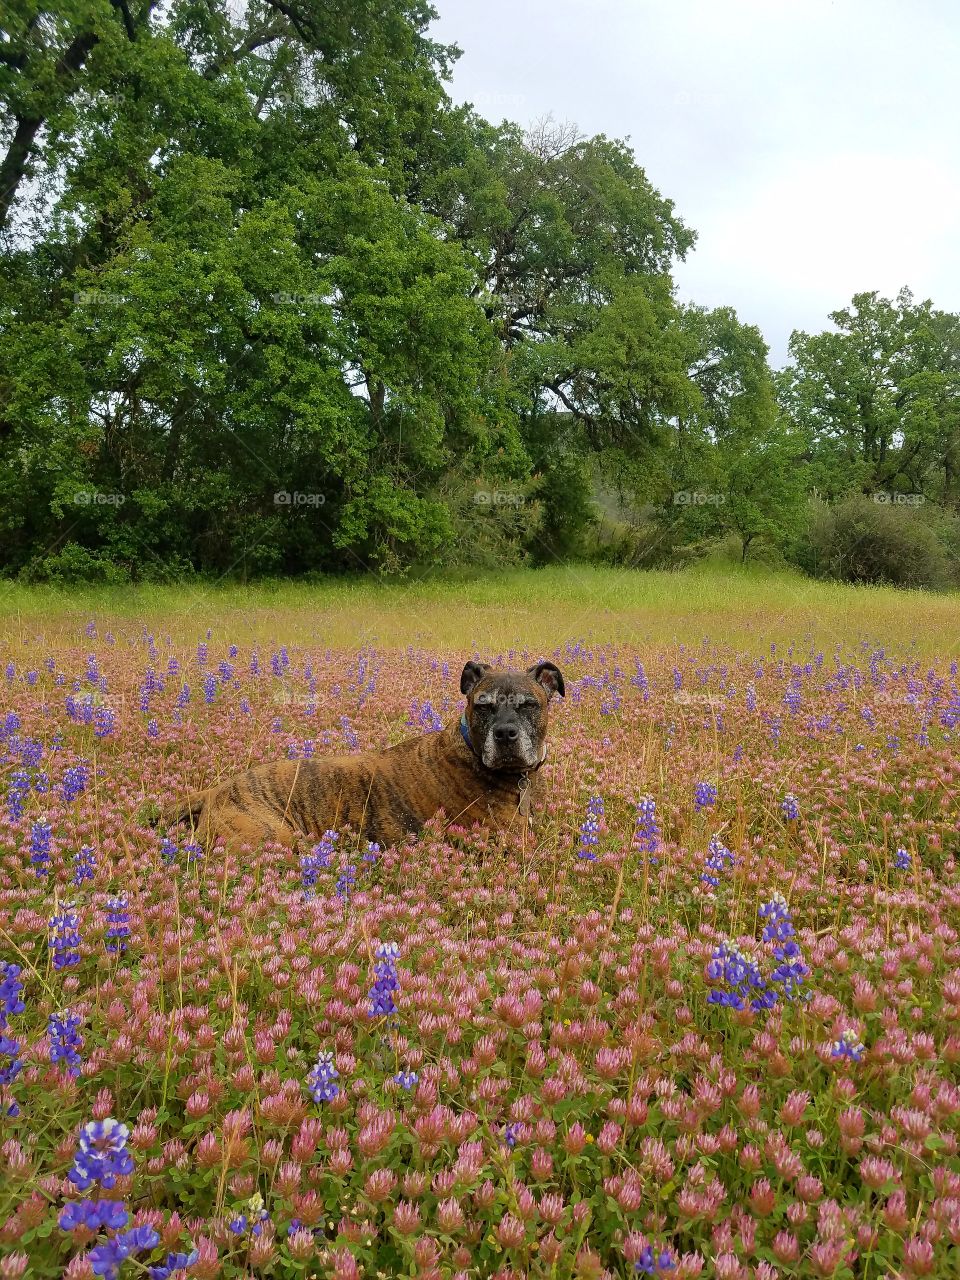 Thor in the wildflowers